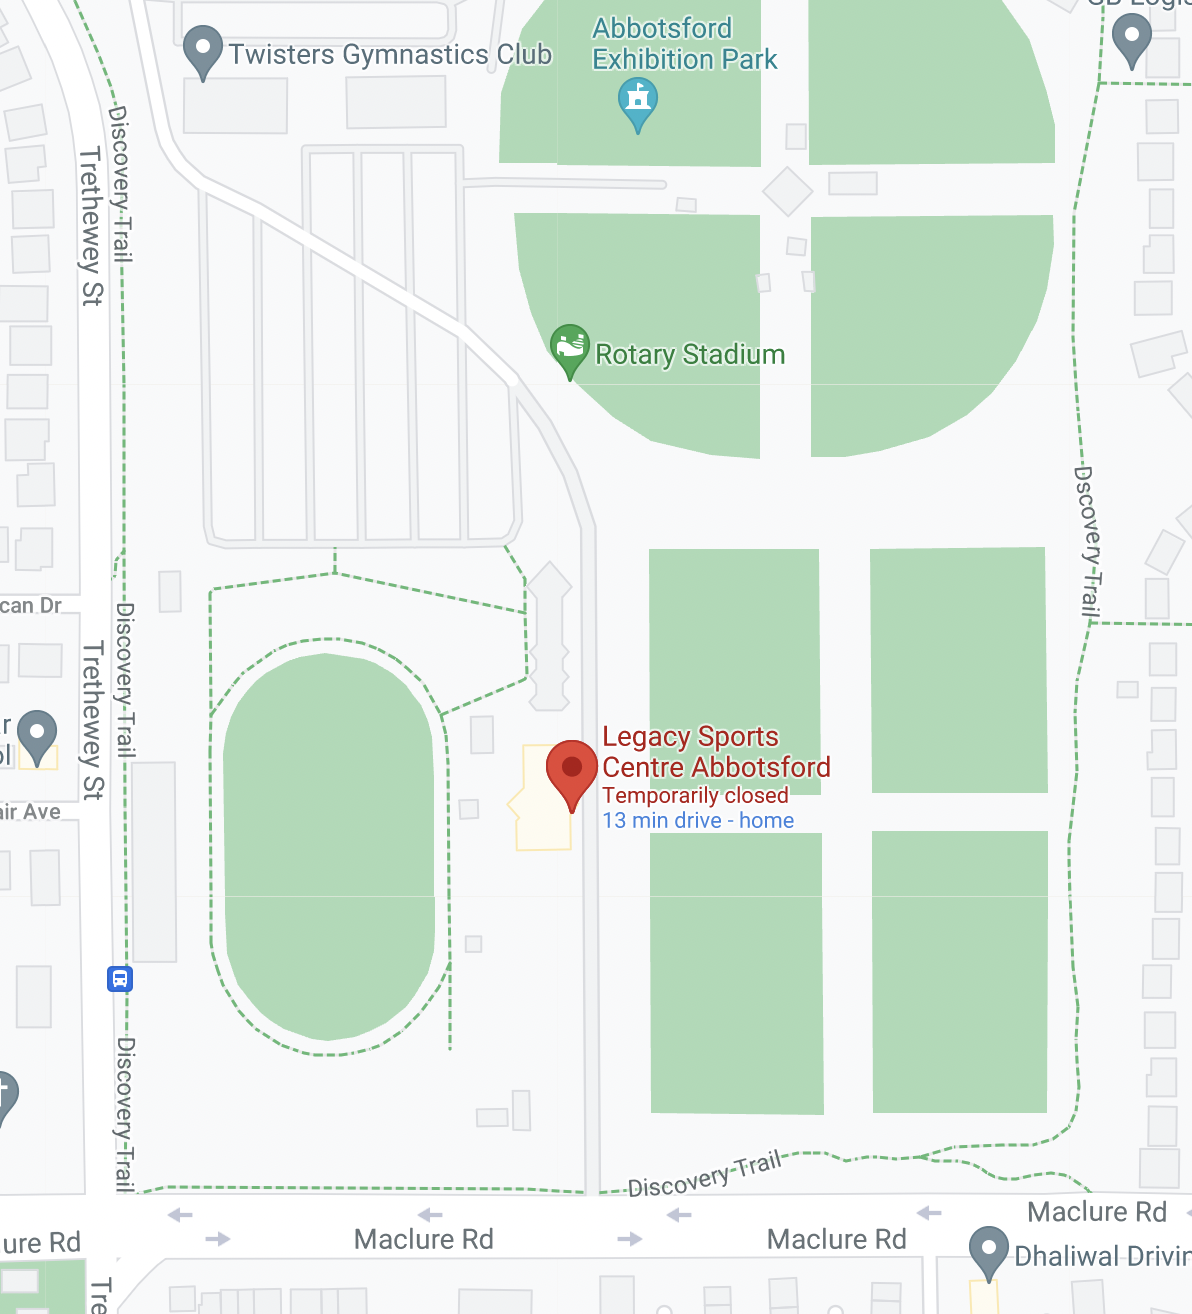 A map of Rotary Stadium in Abbotsford, showing the position of the Legacy Building